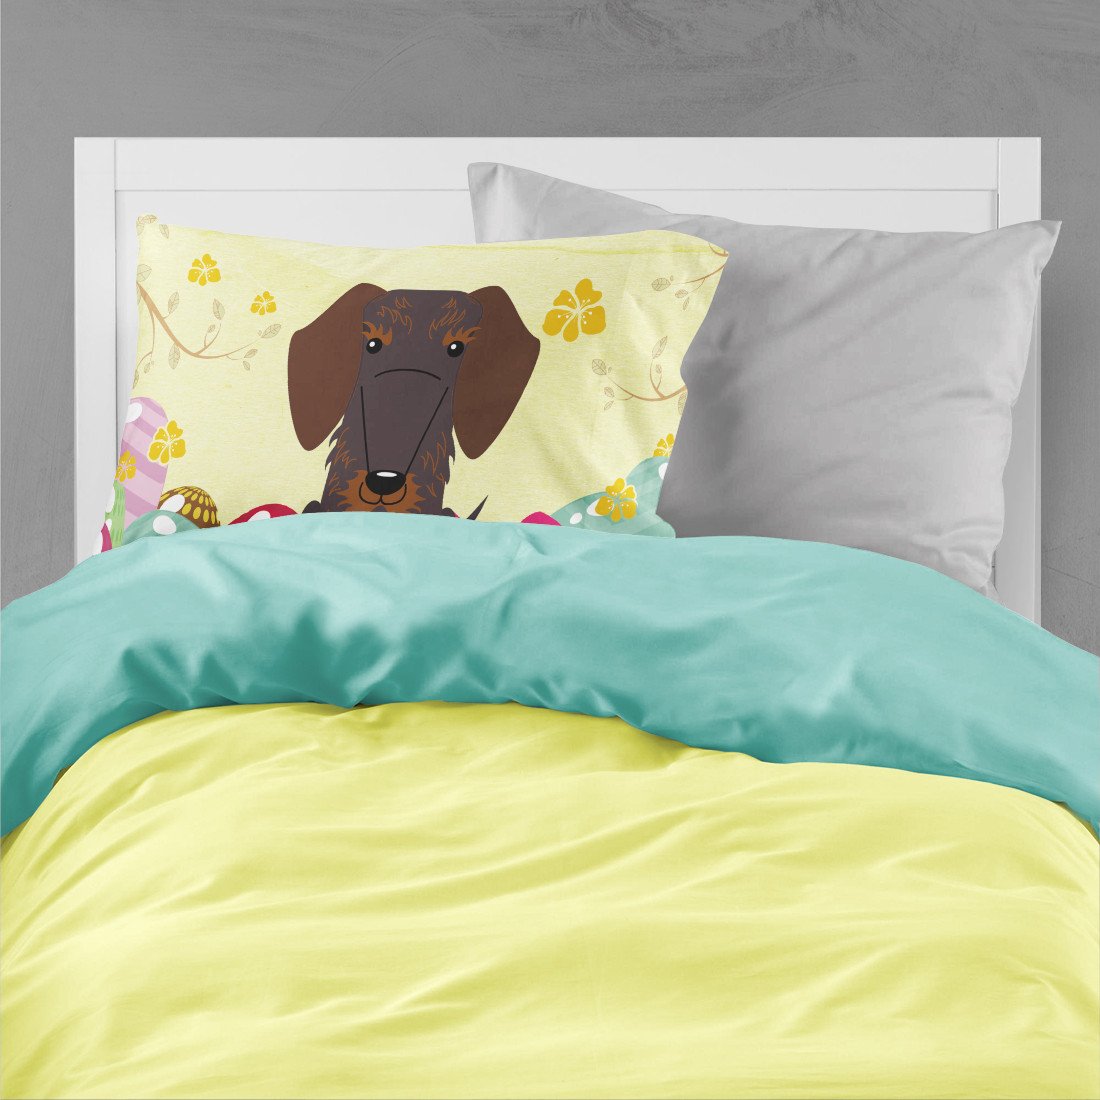 Easter Eggs Wire Haired Dachshund Chocolate Fabric Standard Pillowcase BB6129PILLOWCASE by Caroline's Treasures